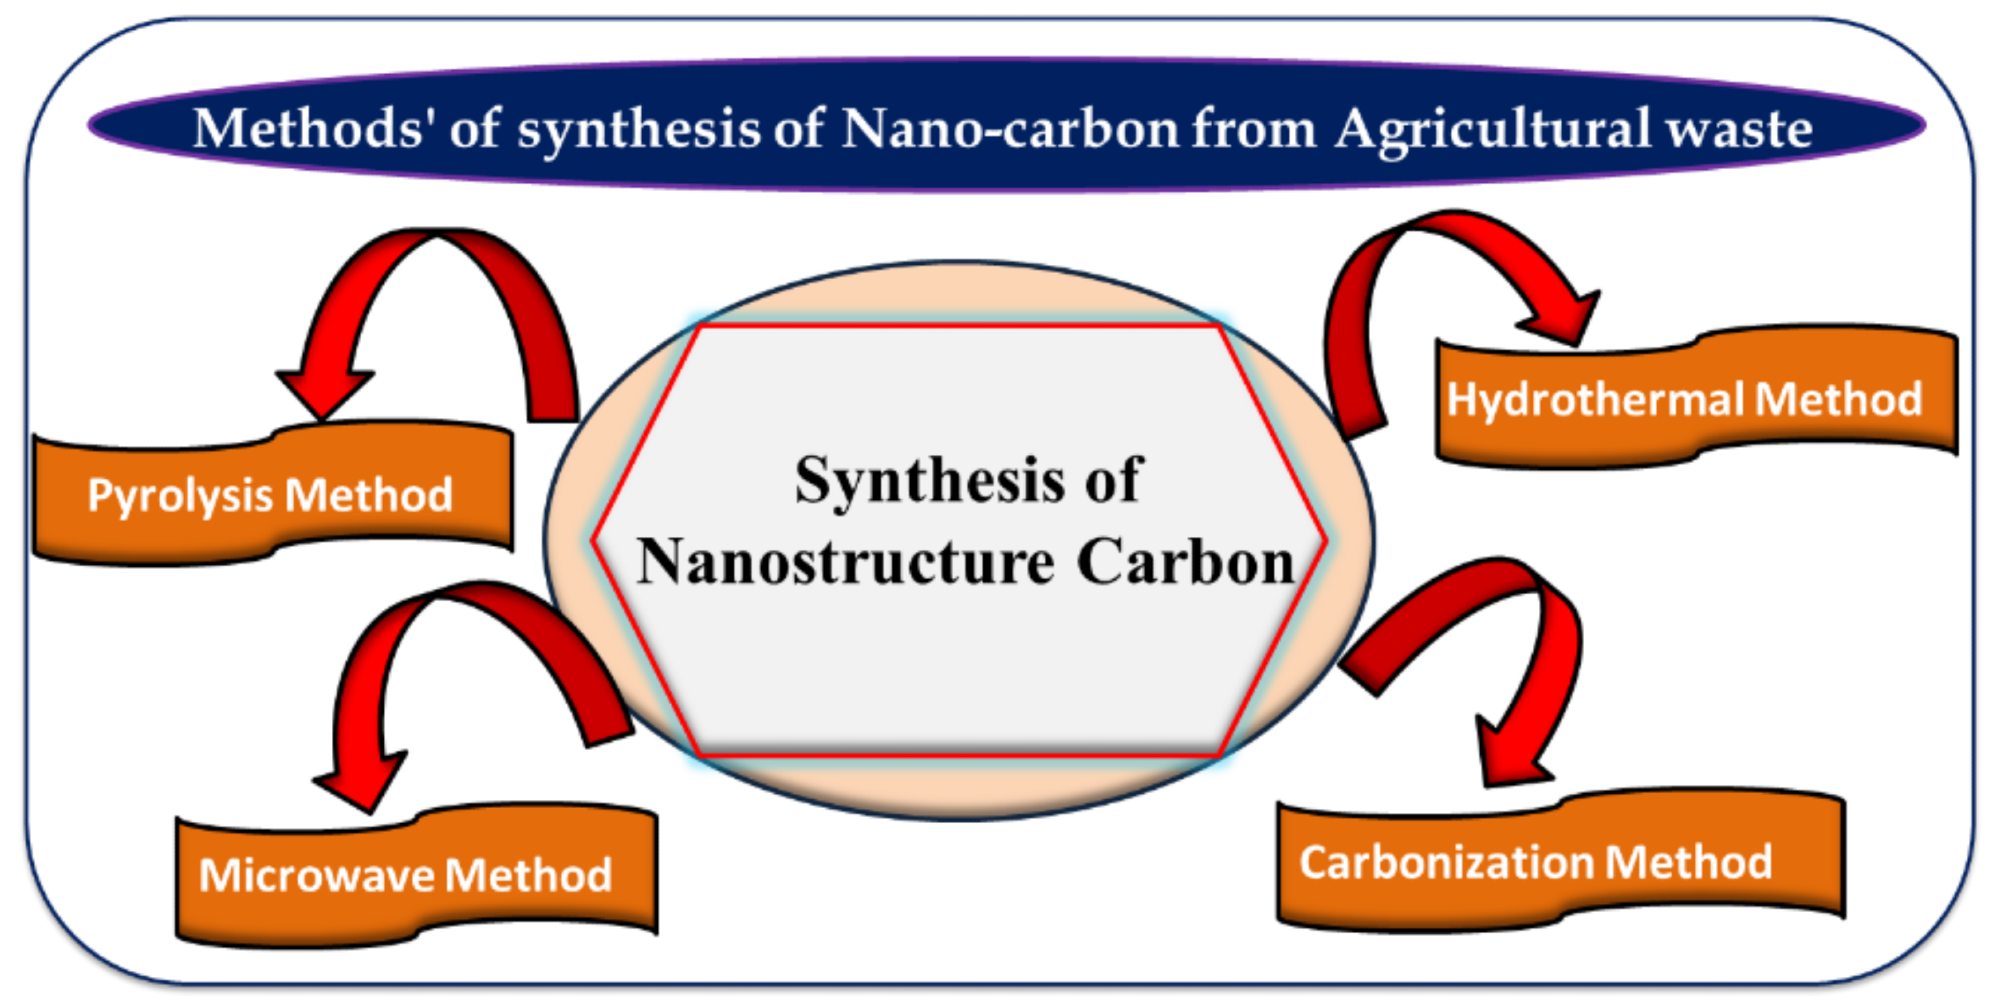 Various methods such as pyrolysis, microwave, hydrothermal and carbonization for the synthesis of nanocarbon from agricultural waste